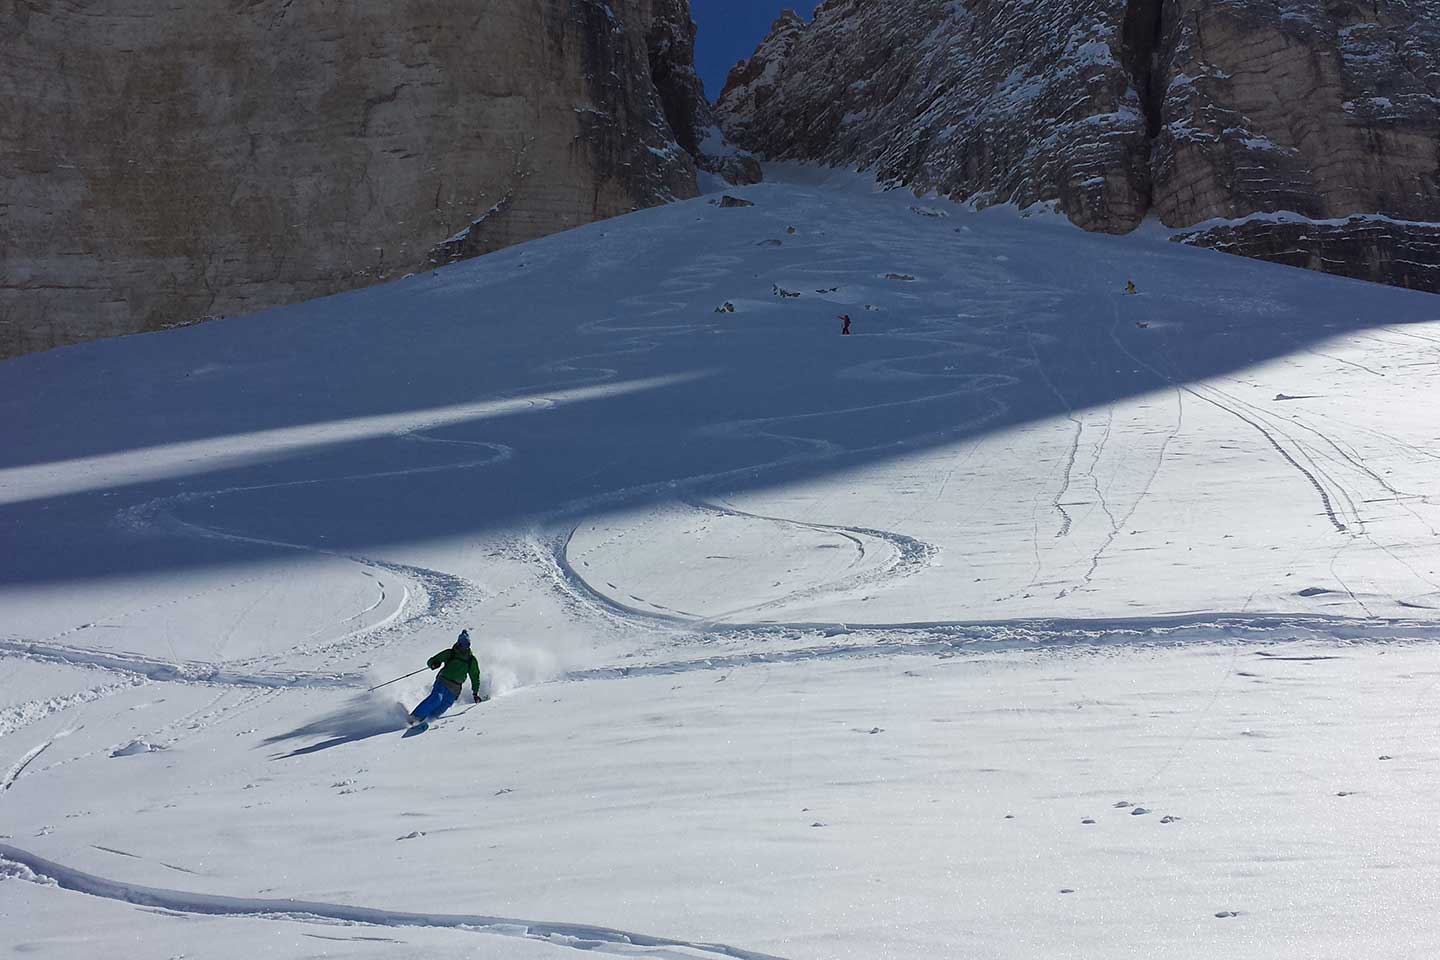 Ski Mountaineering with a Mountain Guide in Alta Pusteria